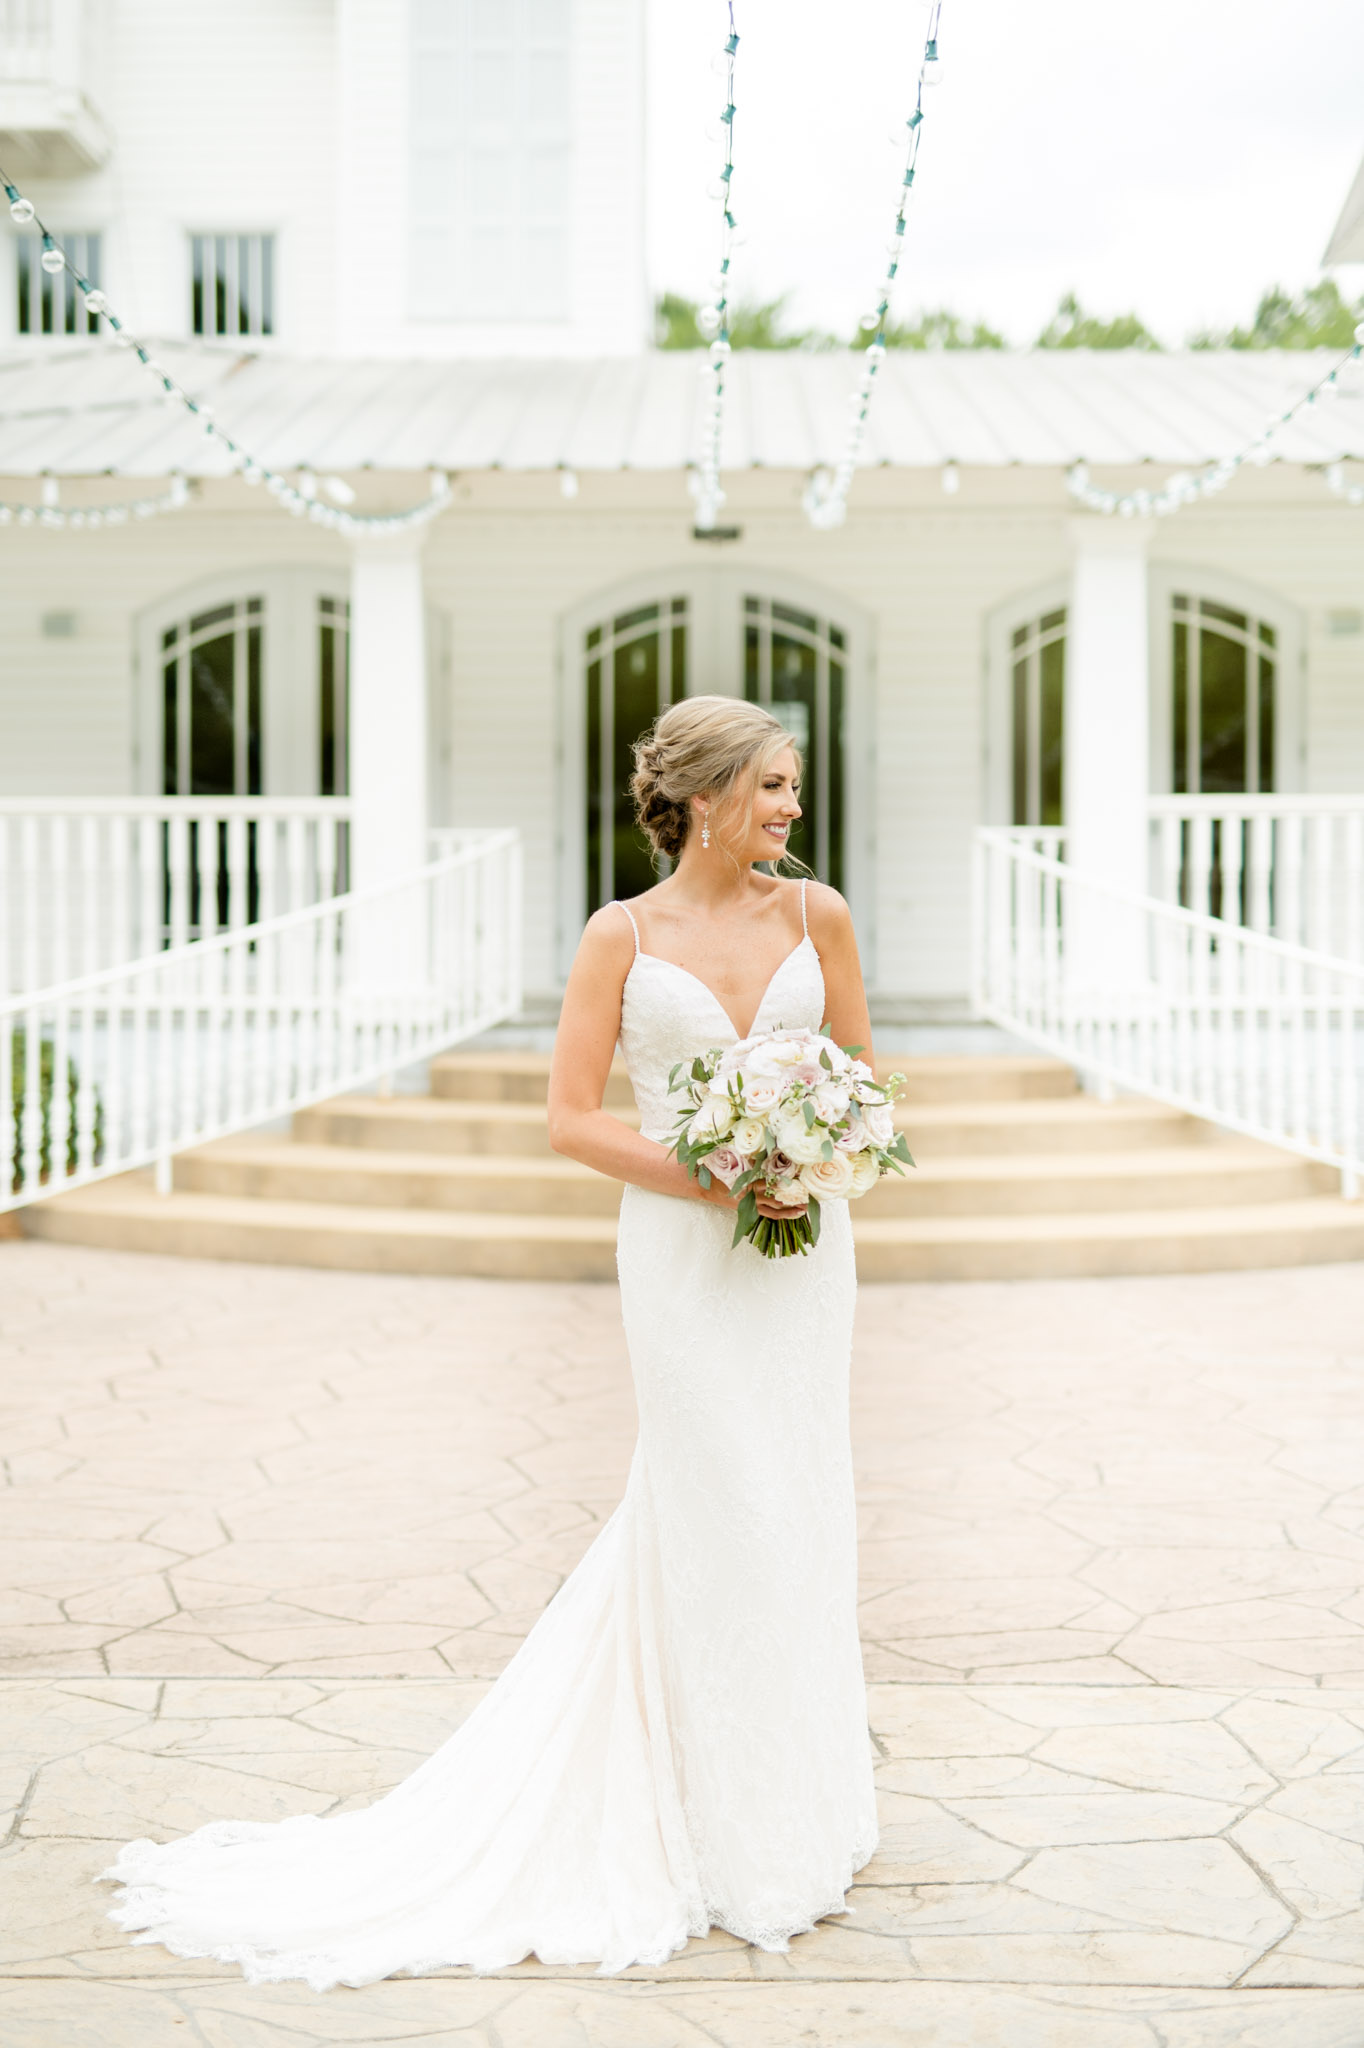 Bride looks over shoulder and smiles at The Sonnet House.